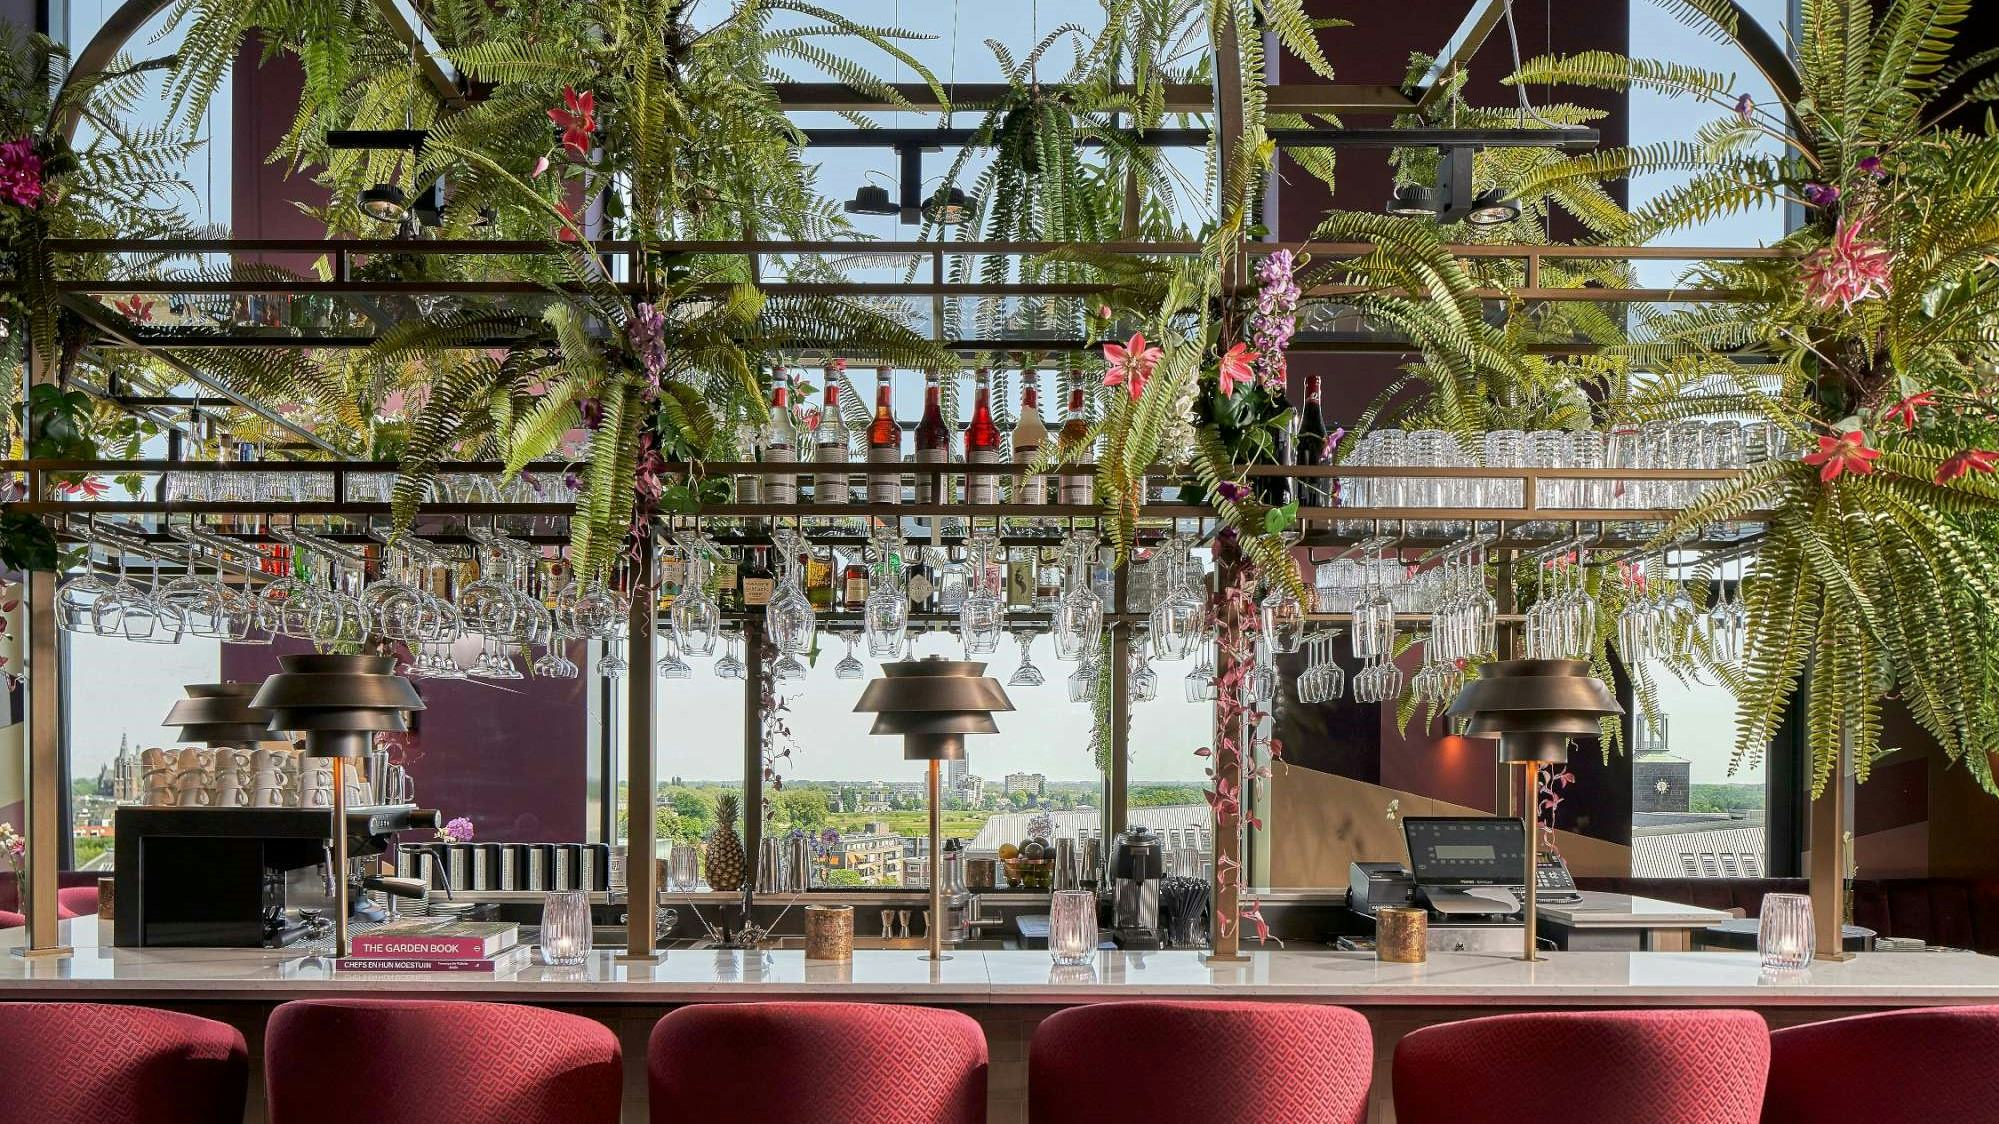 Hotel The Den opent rooftopbar Current